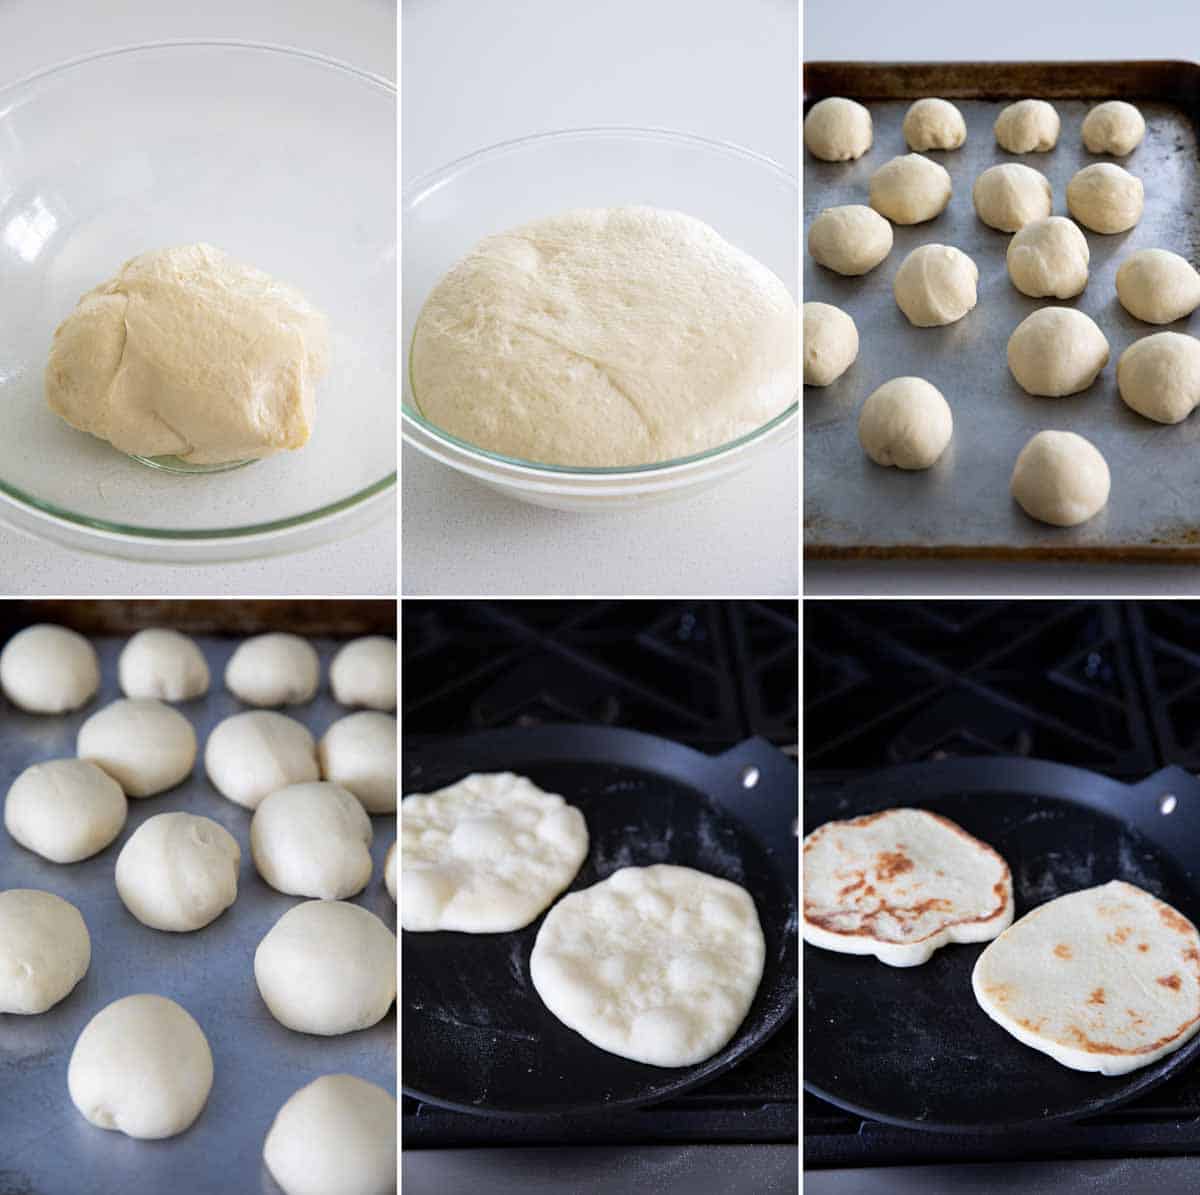 rising bread dough and cooking naan